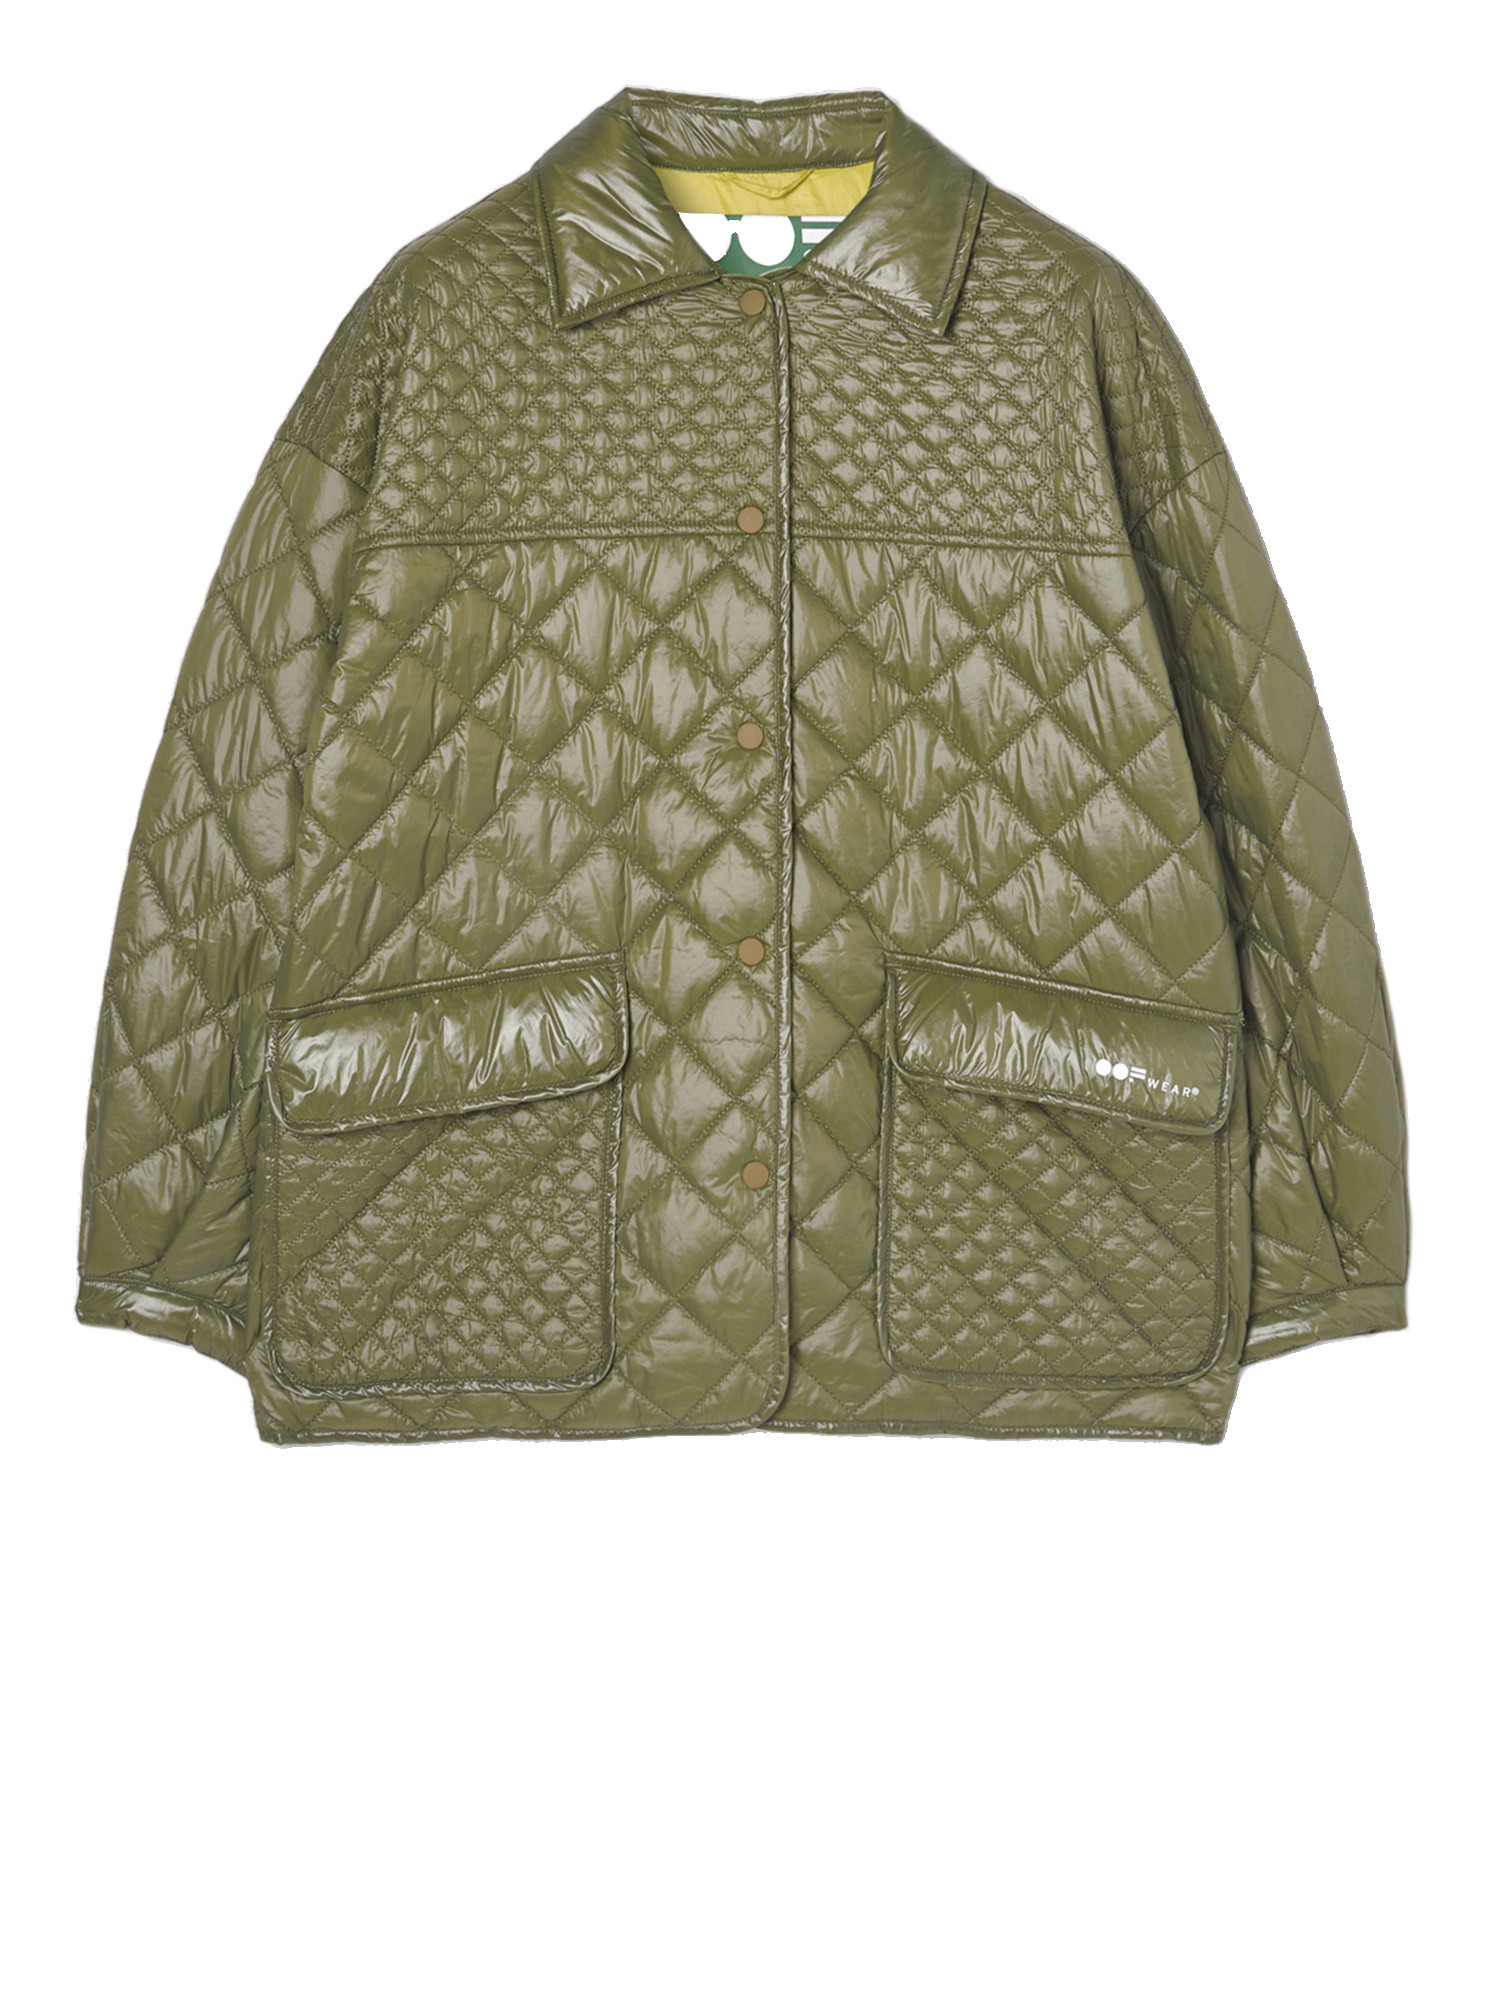 Oof Wear - Quilted Jacket, Dark Green, large image number 0